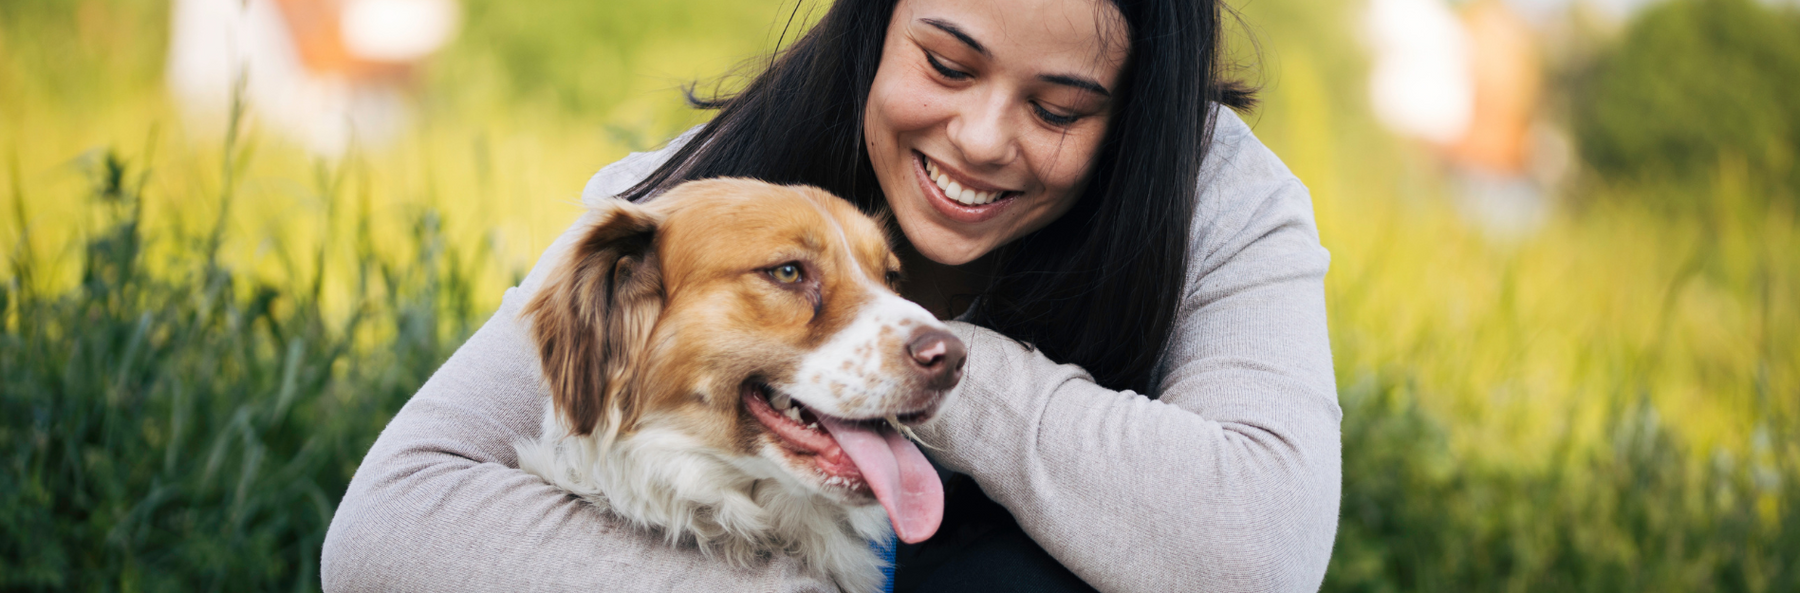 Understanding Your Pet's Body Language for Better Communication